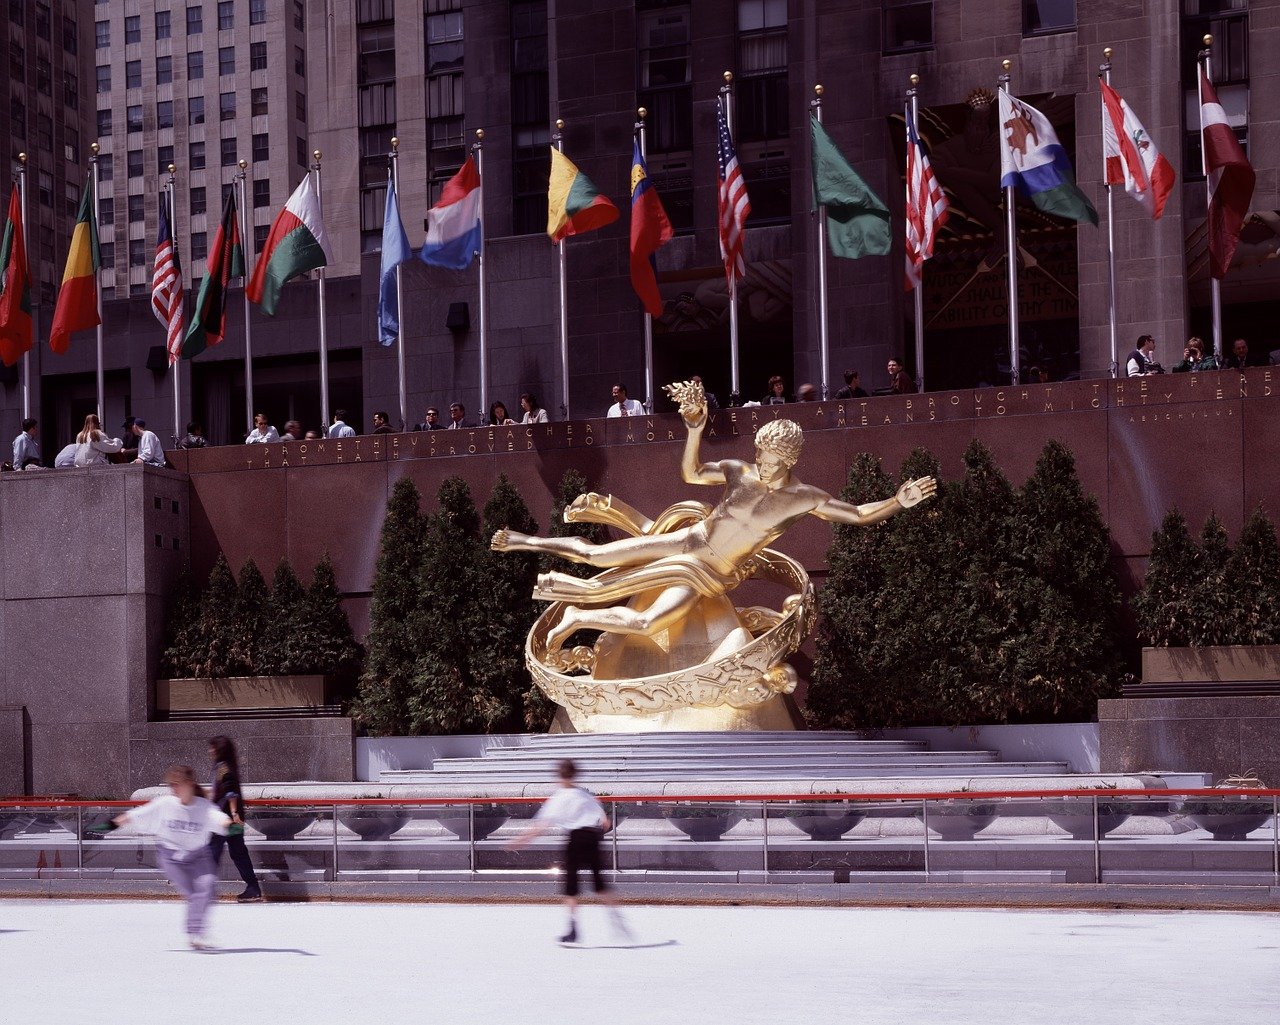 Ice skaters at Rockefeller Center in NYC.